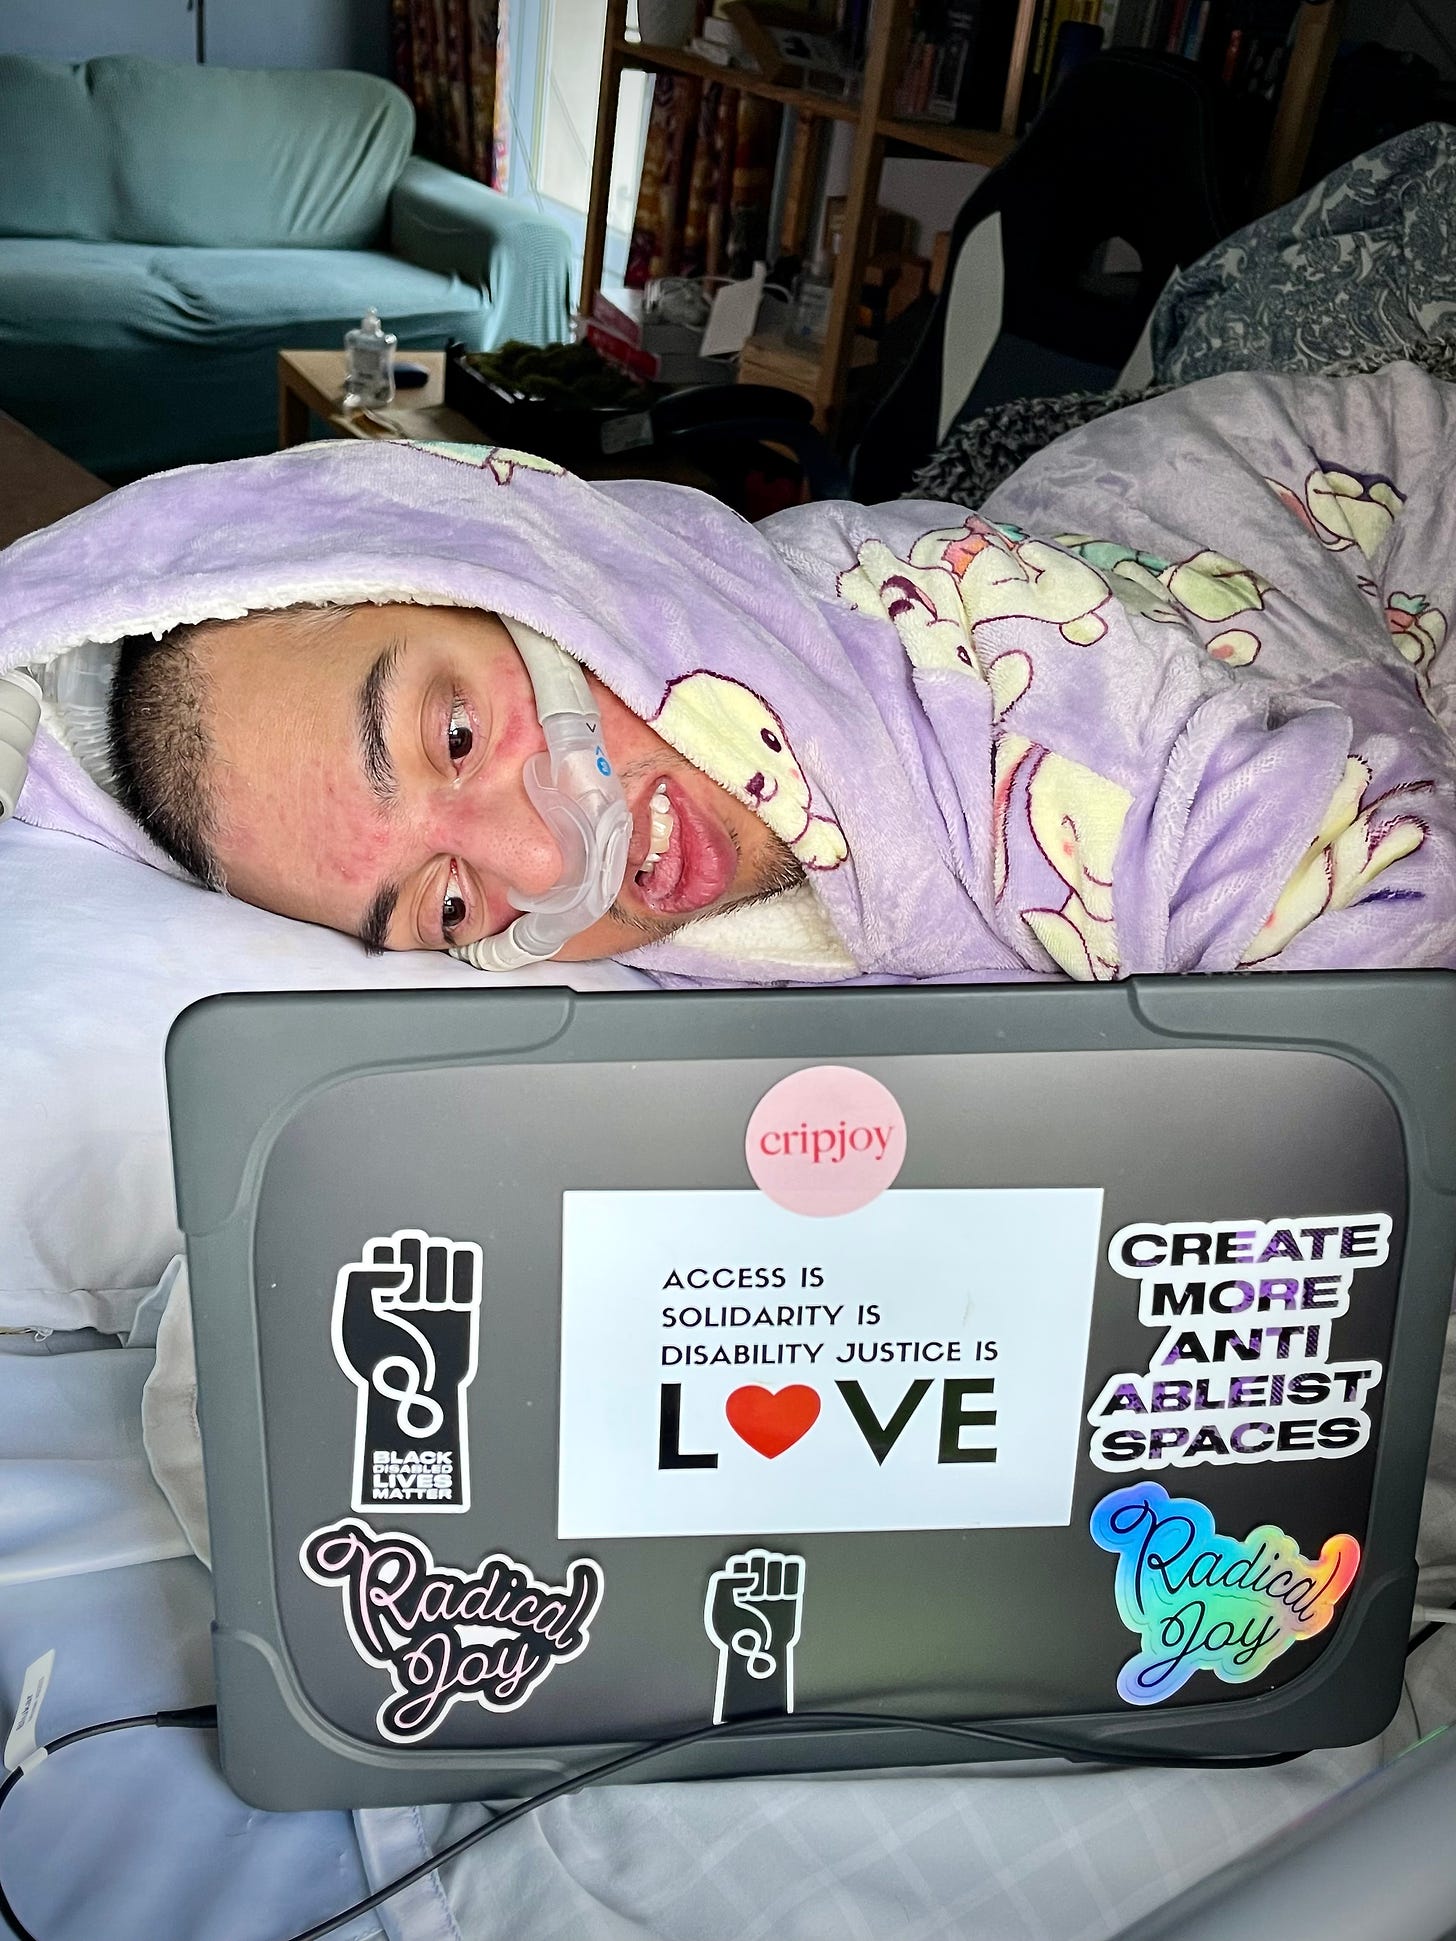 Image description: Bold, wild, fearless existence. In the middle of an abstract dark blue background is a photo of Sulaiman (a wholeheartedly Disabled AF and British-Pakistani man) lying in bed on his right with a nasal ventilator mask over his face as he works on his MacBook Pro laptop. On the grey case of his MacBook Pro are 7 stickers on the back of the screen via Sulaiman himself and his Disabled global kin (by bond) – Jennifer White-Johnson, Alice Wong, Sandy Ho, and Mia Mingus. Sticker 1 is a circular pink sticker with red text that says “Cripjoy.” Sticker 2 is a sticker with a white background featuring a gradient black to purple text that says “Create More Anti-Ableist Spaces” in capital letters. Stickers 3 and 4 are of cursive text that says “Radical Joy,” one a sticker of pink text with a black outline and the other a colourful holographic sticker. Sticker 5 is a graphic of the black power fist against a white background with the infinity symbol and the words “Black Disabled Lives Matter” written in bold white font placed down the wrist of the fist. Sticker 6 is a graphic of the black power fist against a white background with the infinity symbol for neurodiversity in bold white lines placed down the wrist of the fist. Finally, sticker 7 is an extensive rectangular white background with black text over 4 lines; on lines 1 to 3, the text says, “Access is… Solidarity is… Disability Justice is…” and on line 4, the larger text says, “Love” in capital letters with the “o” replaced with a red heart emoji. Sulaiman is wearing his Bunny Oodie (“like a jumper crossed with a blanket crossed with a cloud”) in purple via @the_oodie, and he feels calm as he works on his MacBook Pro. At the top middle of the image is cursive white text that says, “Sulaiman R. Khan.” Below it, in all caps, white text is “Daringly Integrating Disability.” At the bottom right corner of the image is the social logo of ThisAbility Limited in all white featuring the Adinkra symbol for interdependence. End.